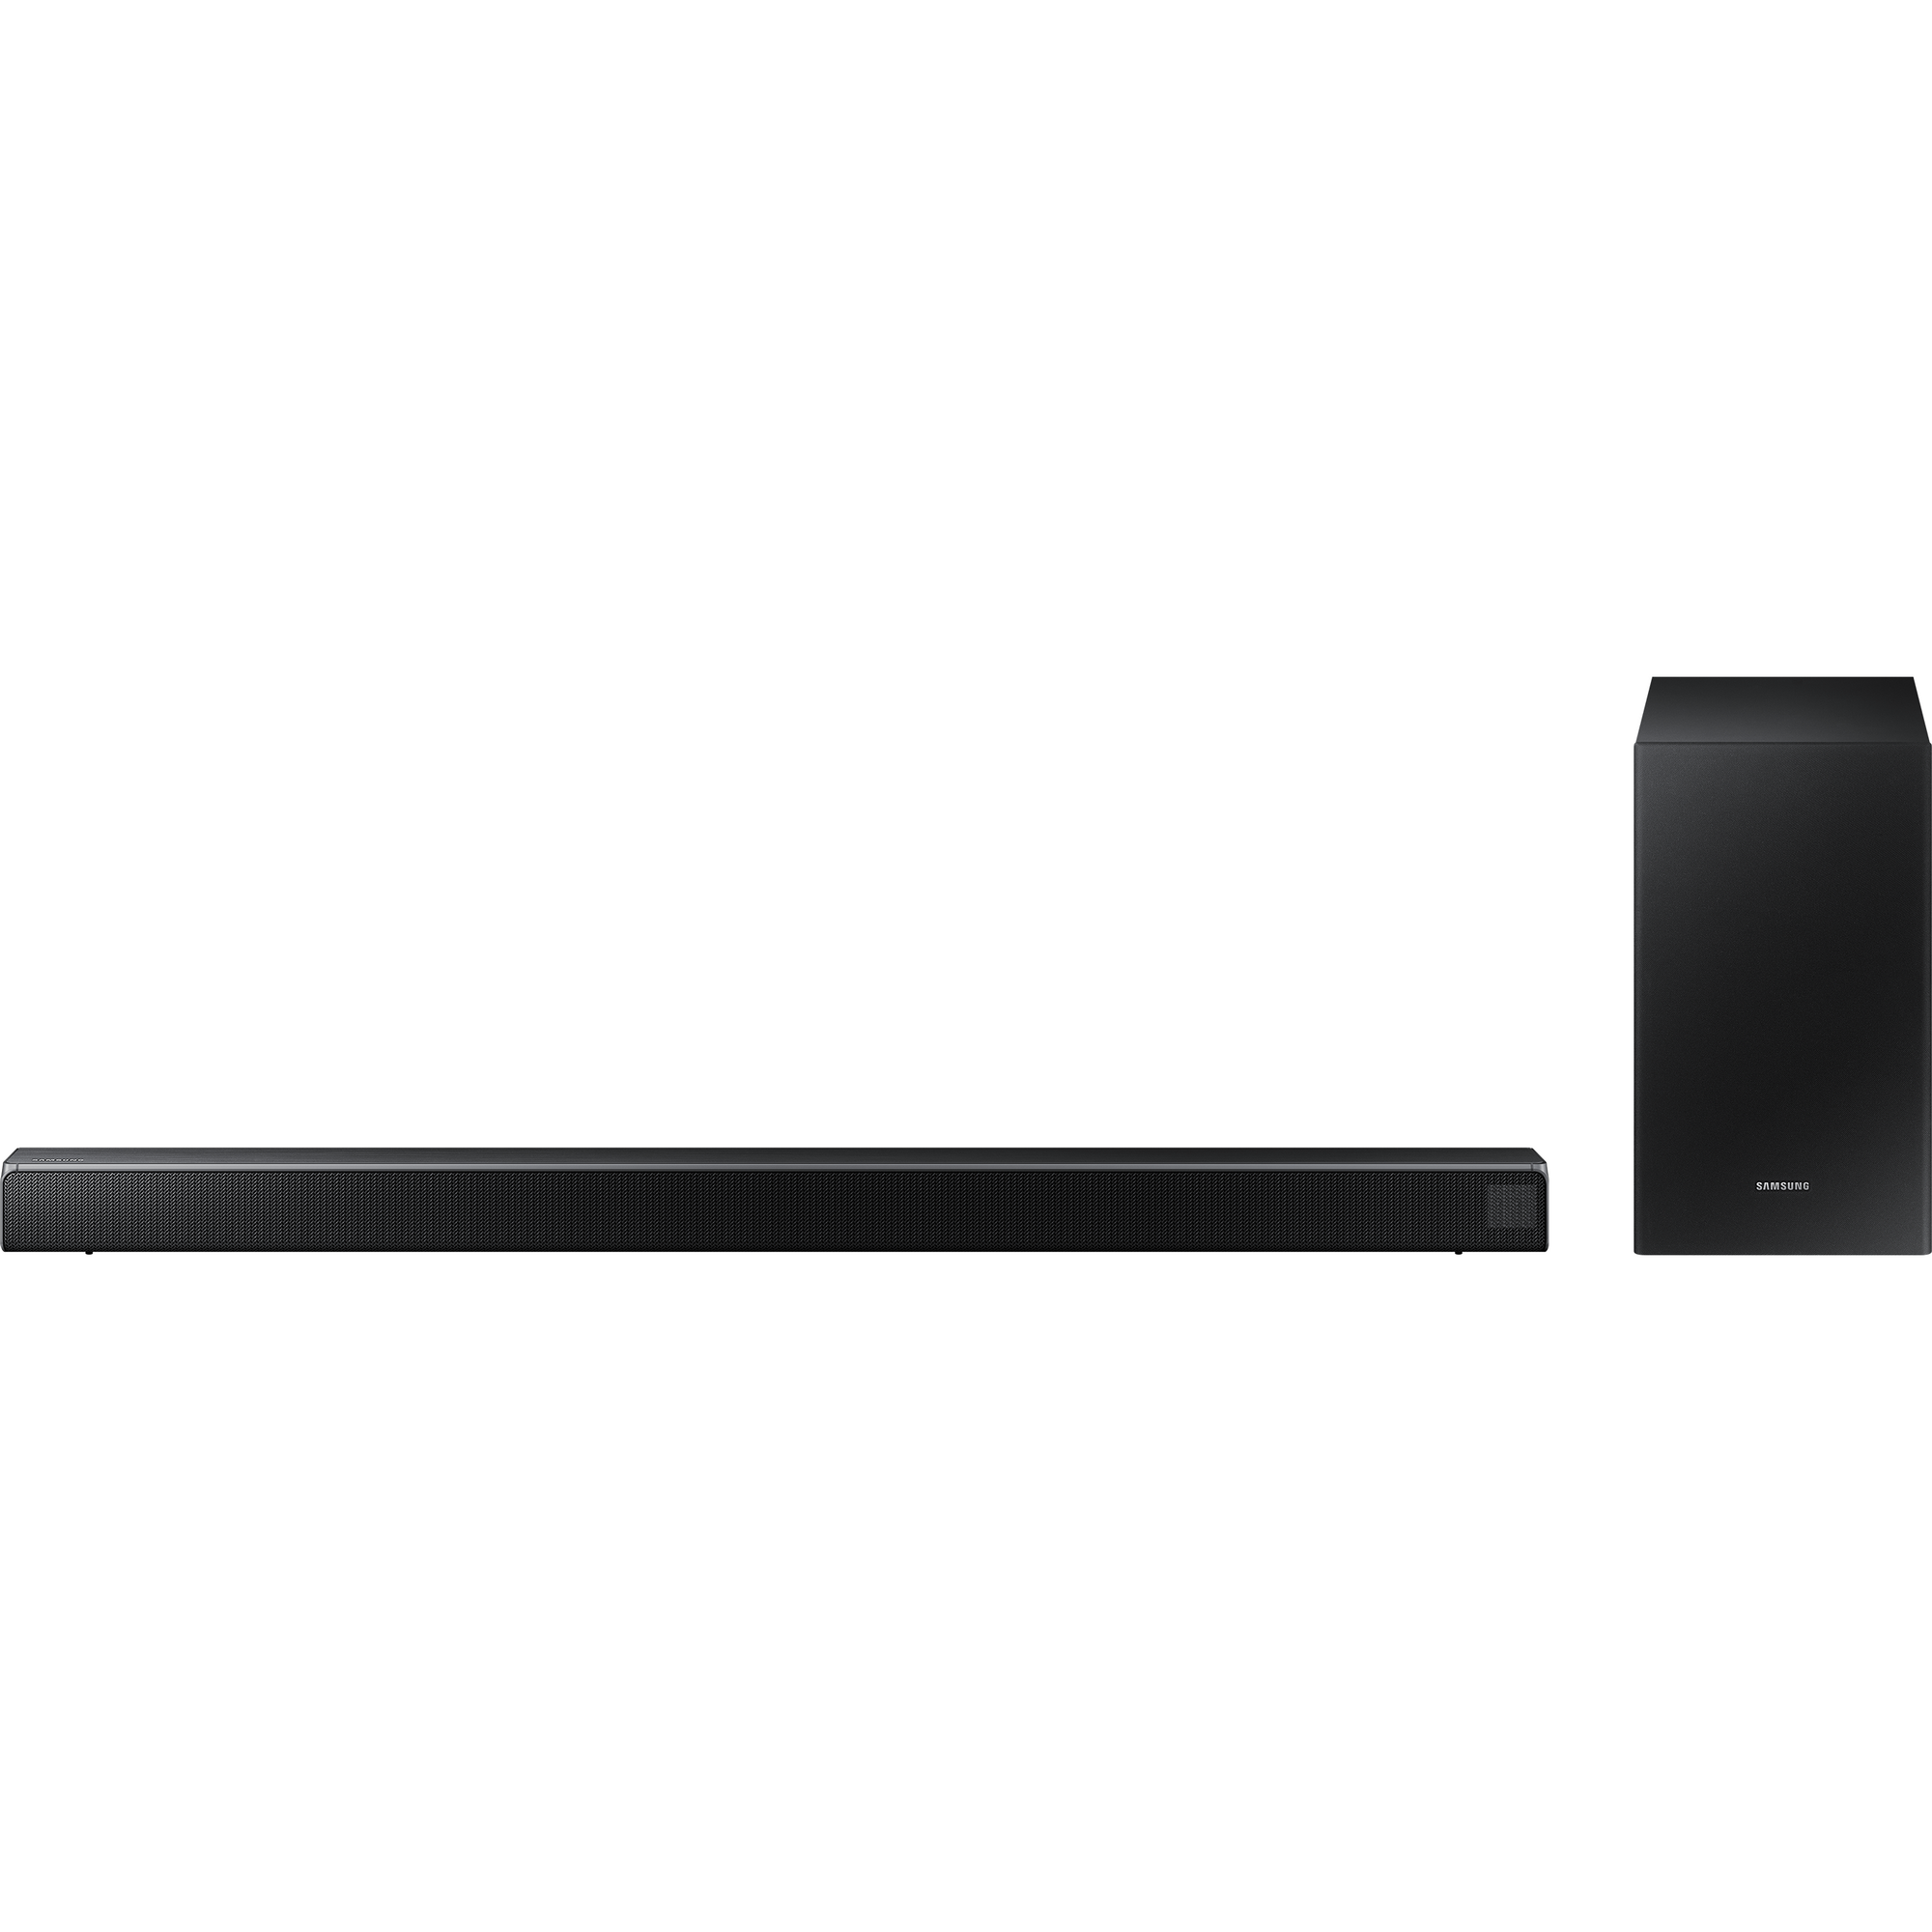 Open Boxed/ Ex-Display - Samsung 2.1ch 320W Soundbar with Wireless Subwoofer - Jet black | HW-R550/XU from Samsung - DID Electrical